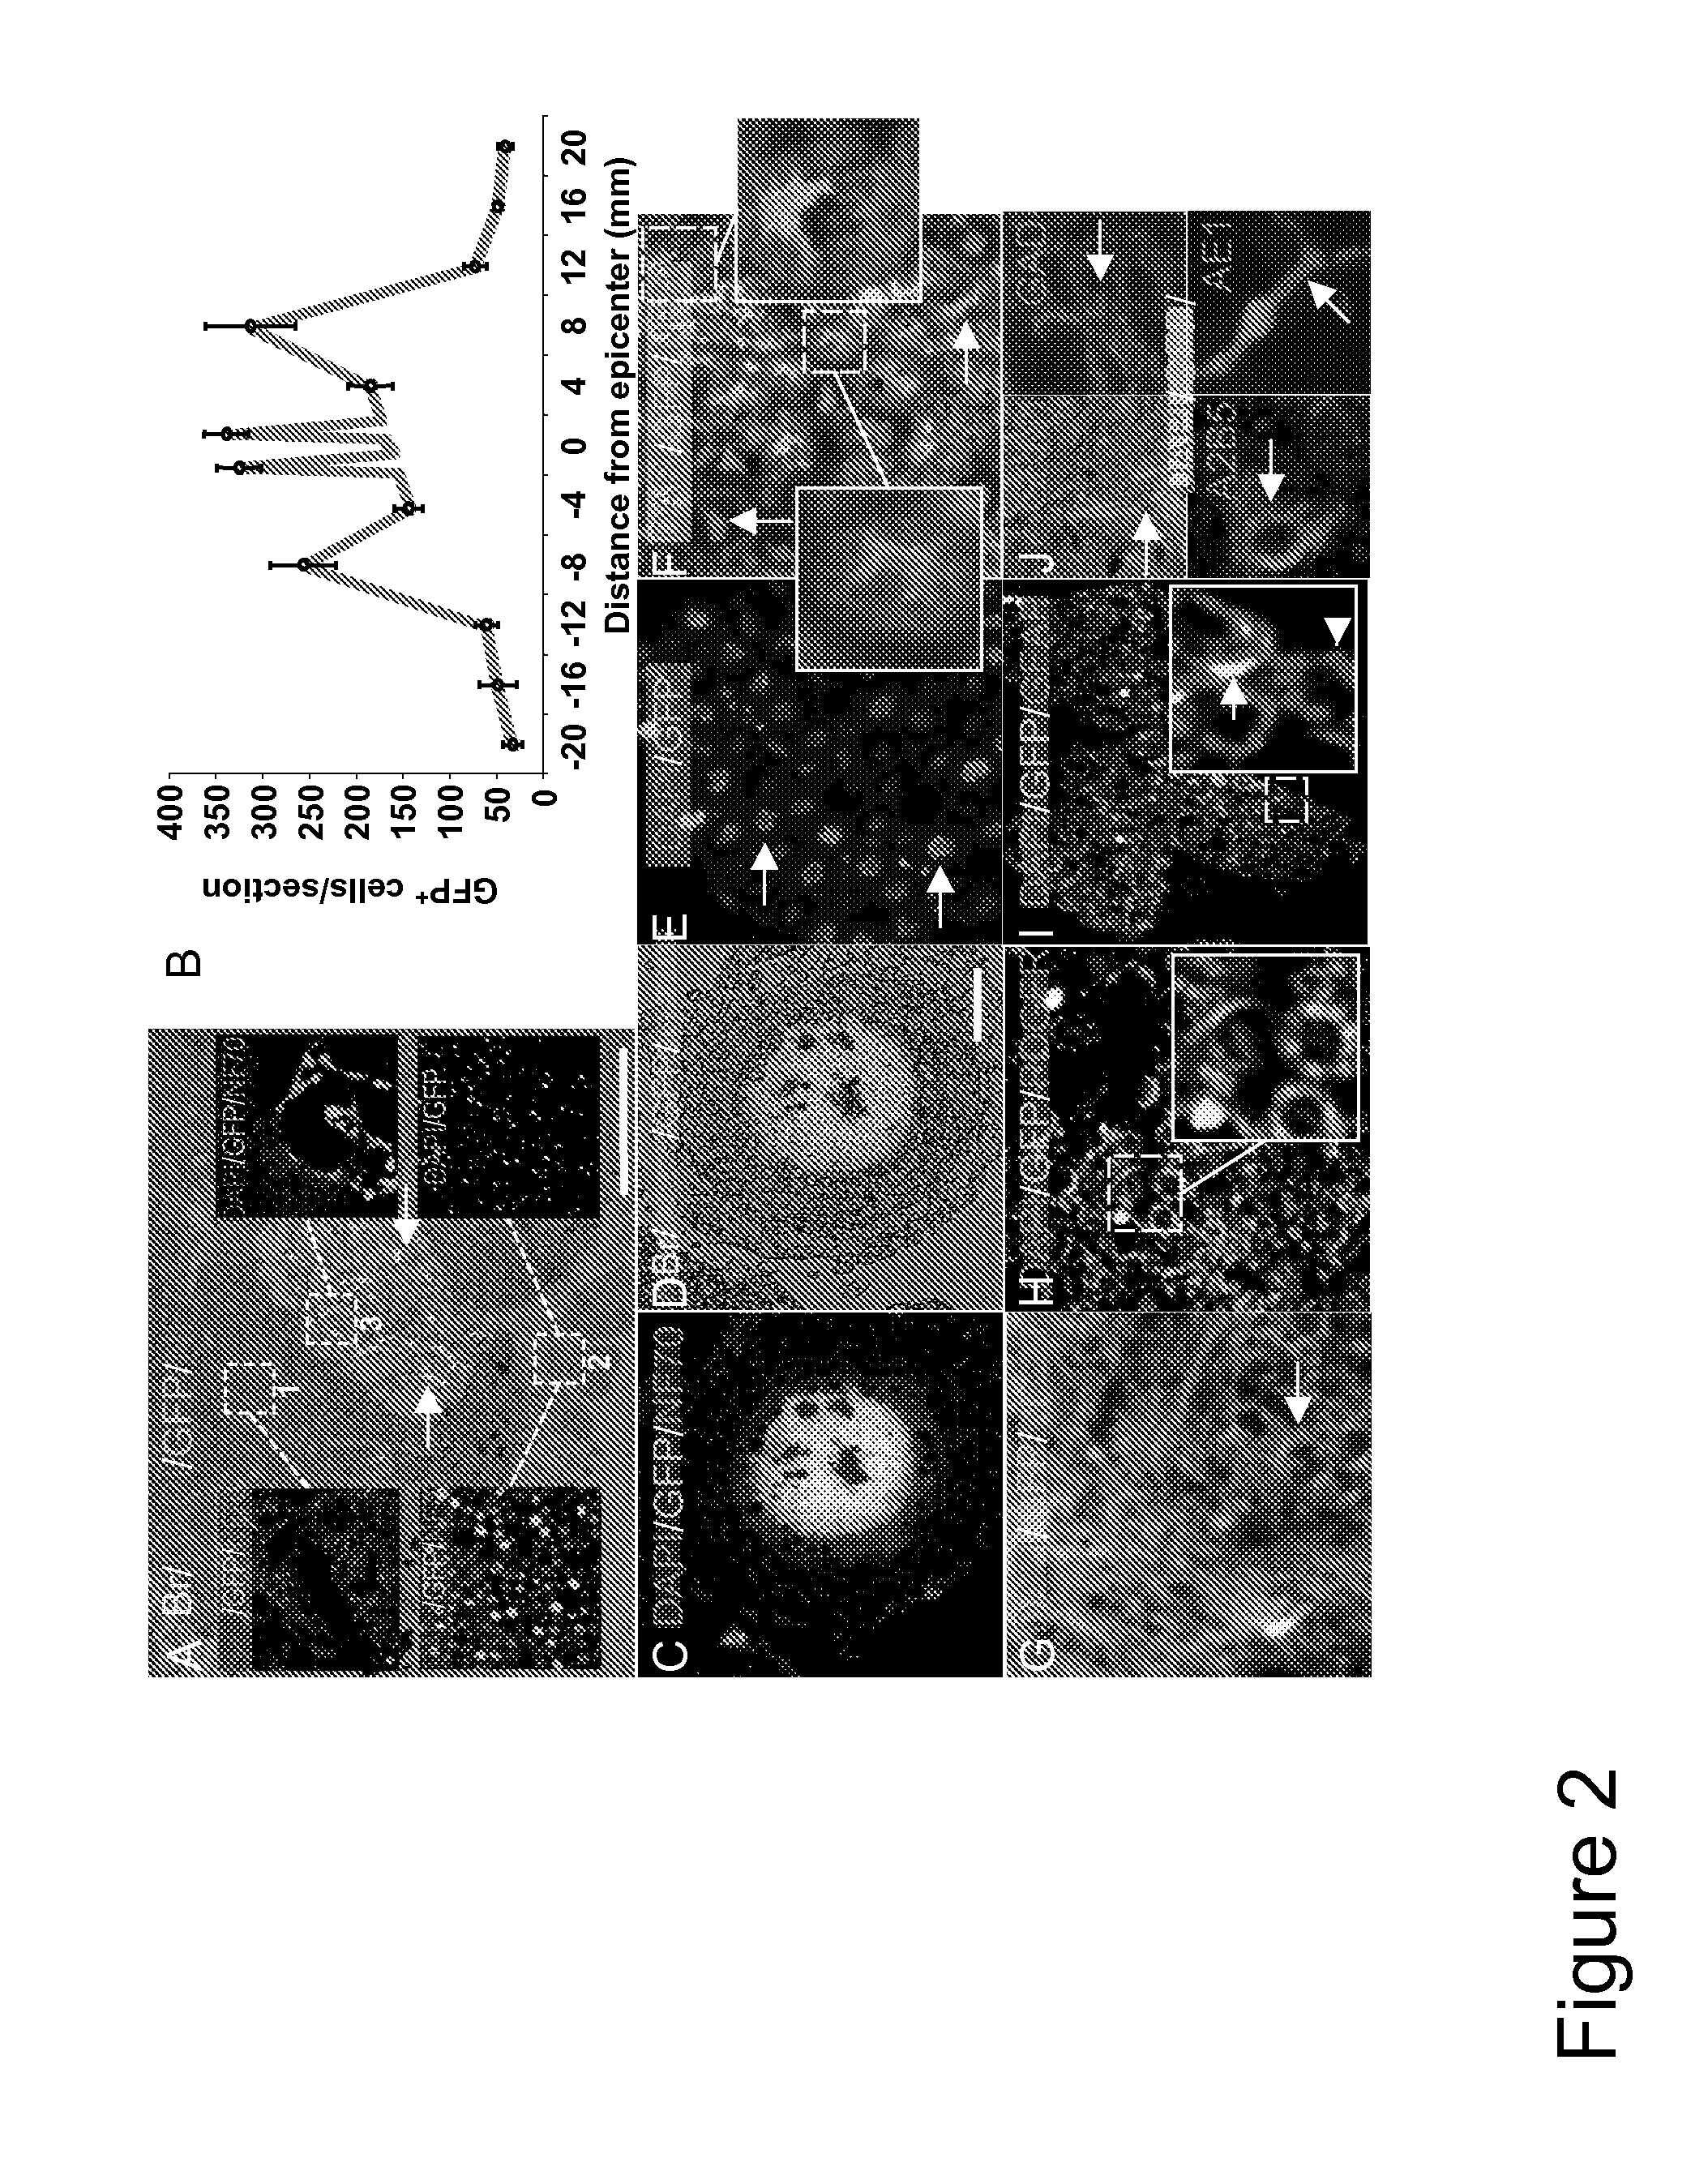 Method for treating chronic nerve tissue injury using a cell therapy strategy